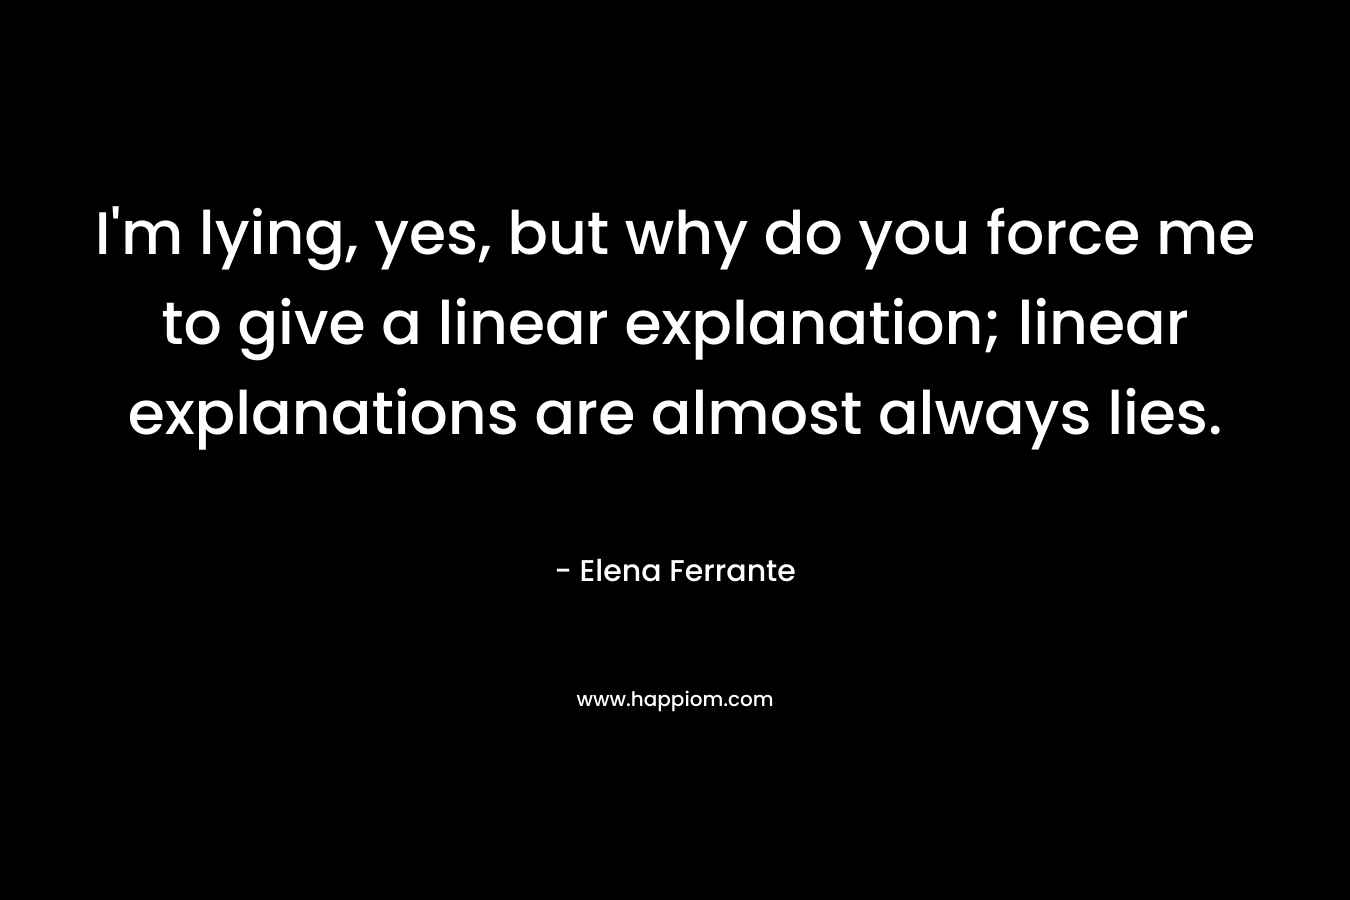 I’m lying, yes, but why do you force me to give a linear explanation; linear explanations are almost always lies. – Elena Ferrante